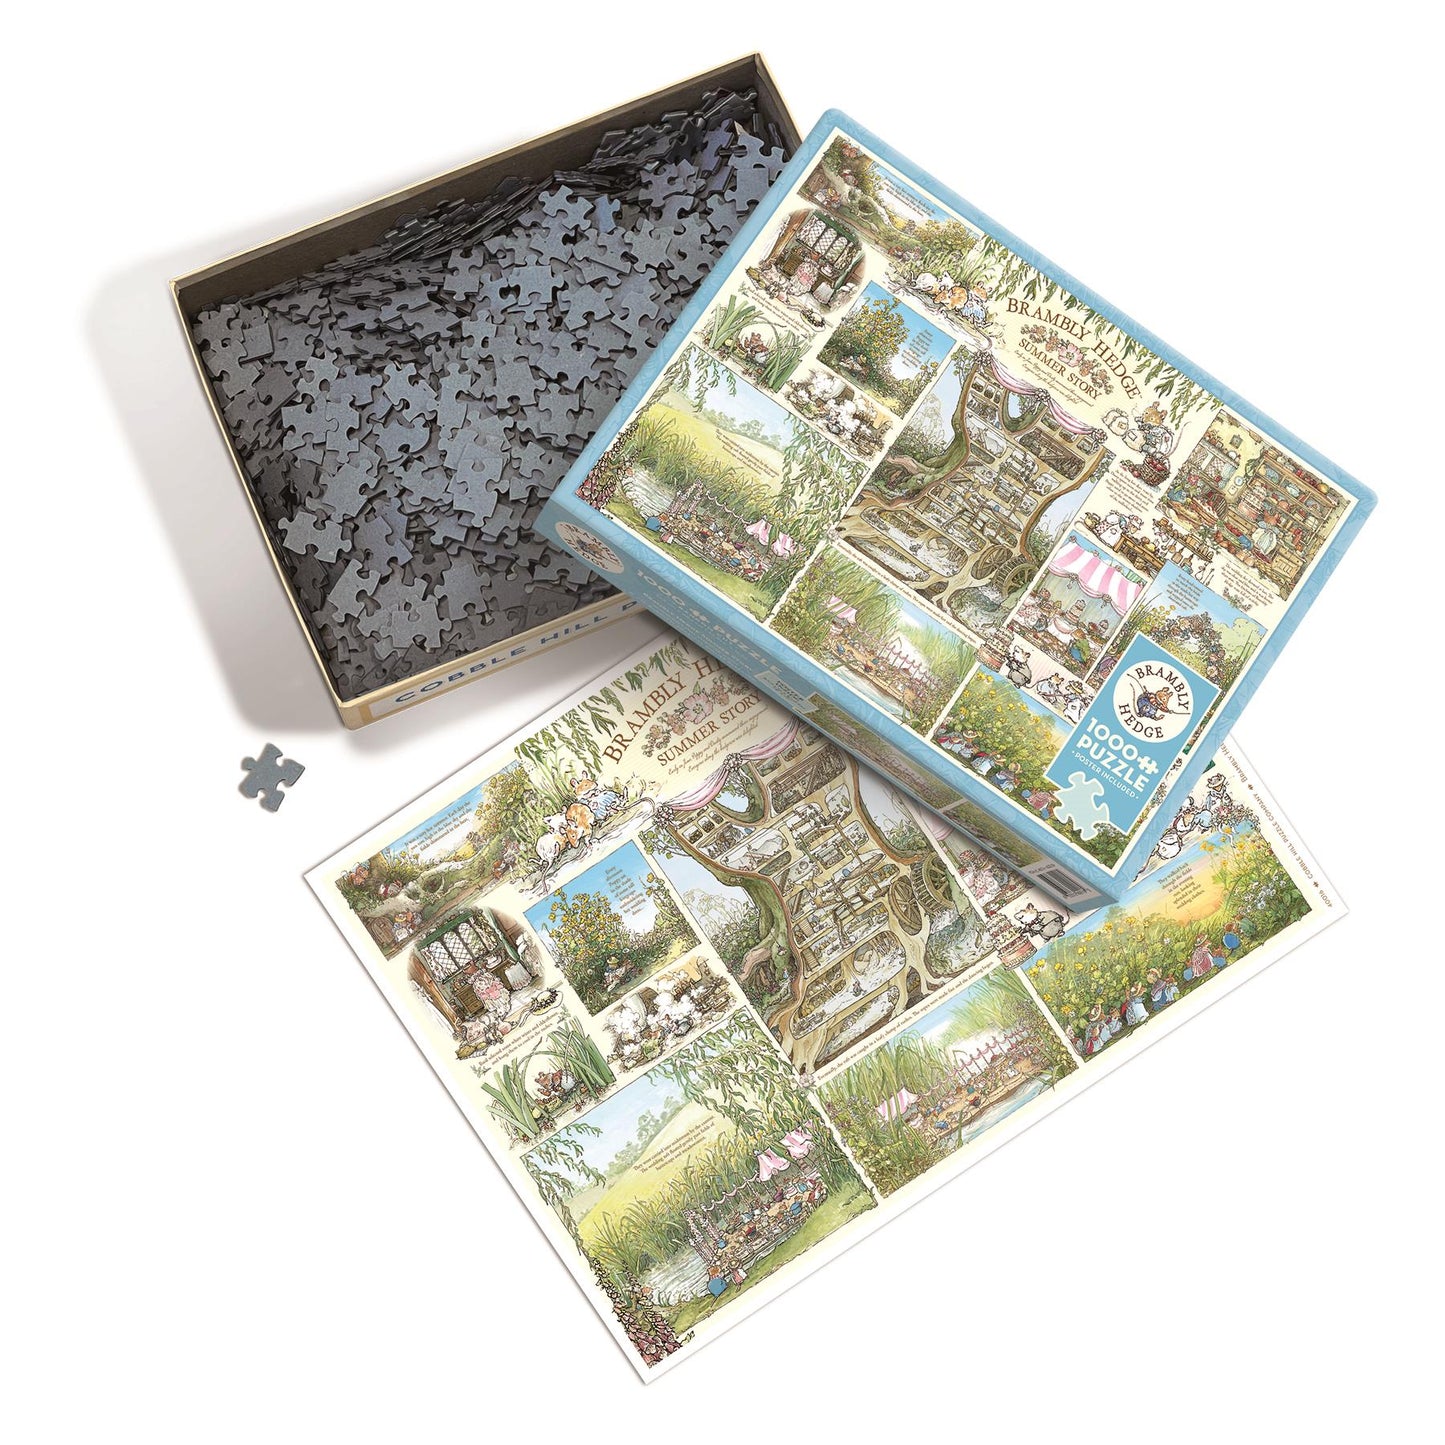 Brambly Hedge Summer Story 1000 Piece Jigsaw Puzzle